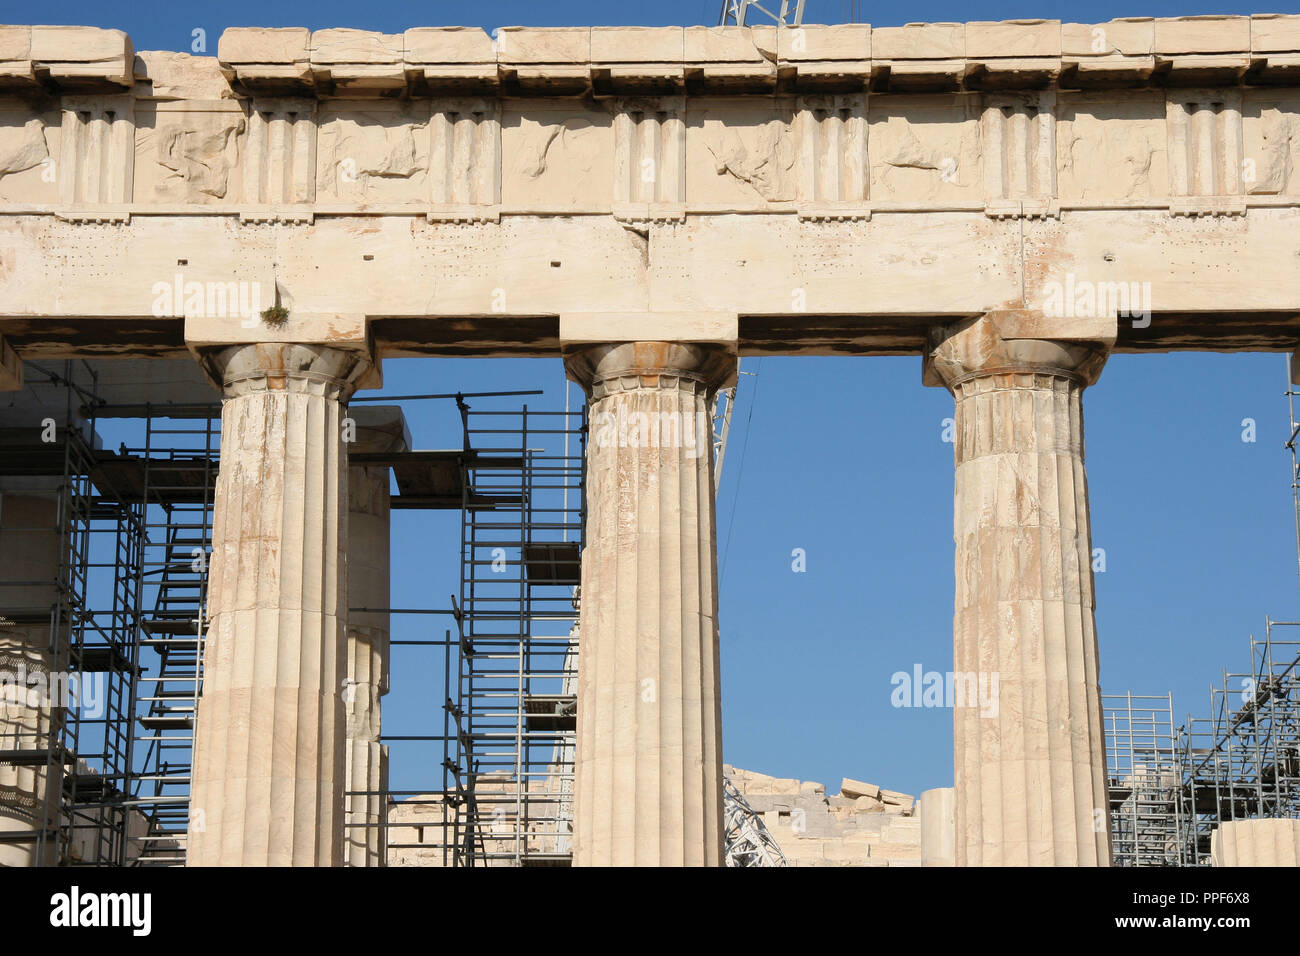 Greek Art. Parthenon. Was built between 447-438 BC. in Doric style under leadership of Pericles. The building was designed by the architects Ictinos and Callicrates. Detail of entablature (frieze with triglyphs and metopes, archirave, capital with abacus, echinus and necking, and columns. Acropolis. Athens. Attica. Central Greek. Europe. Stock Photo